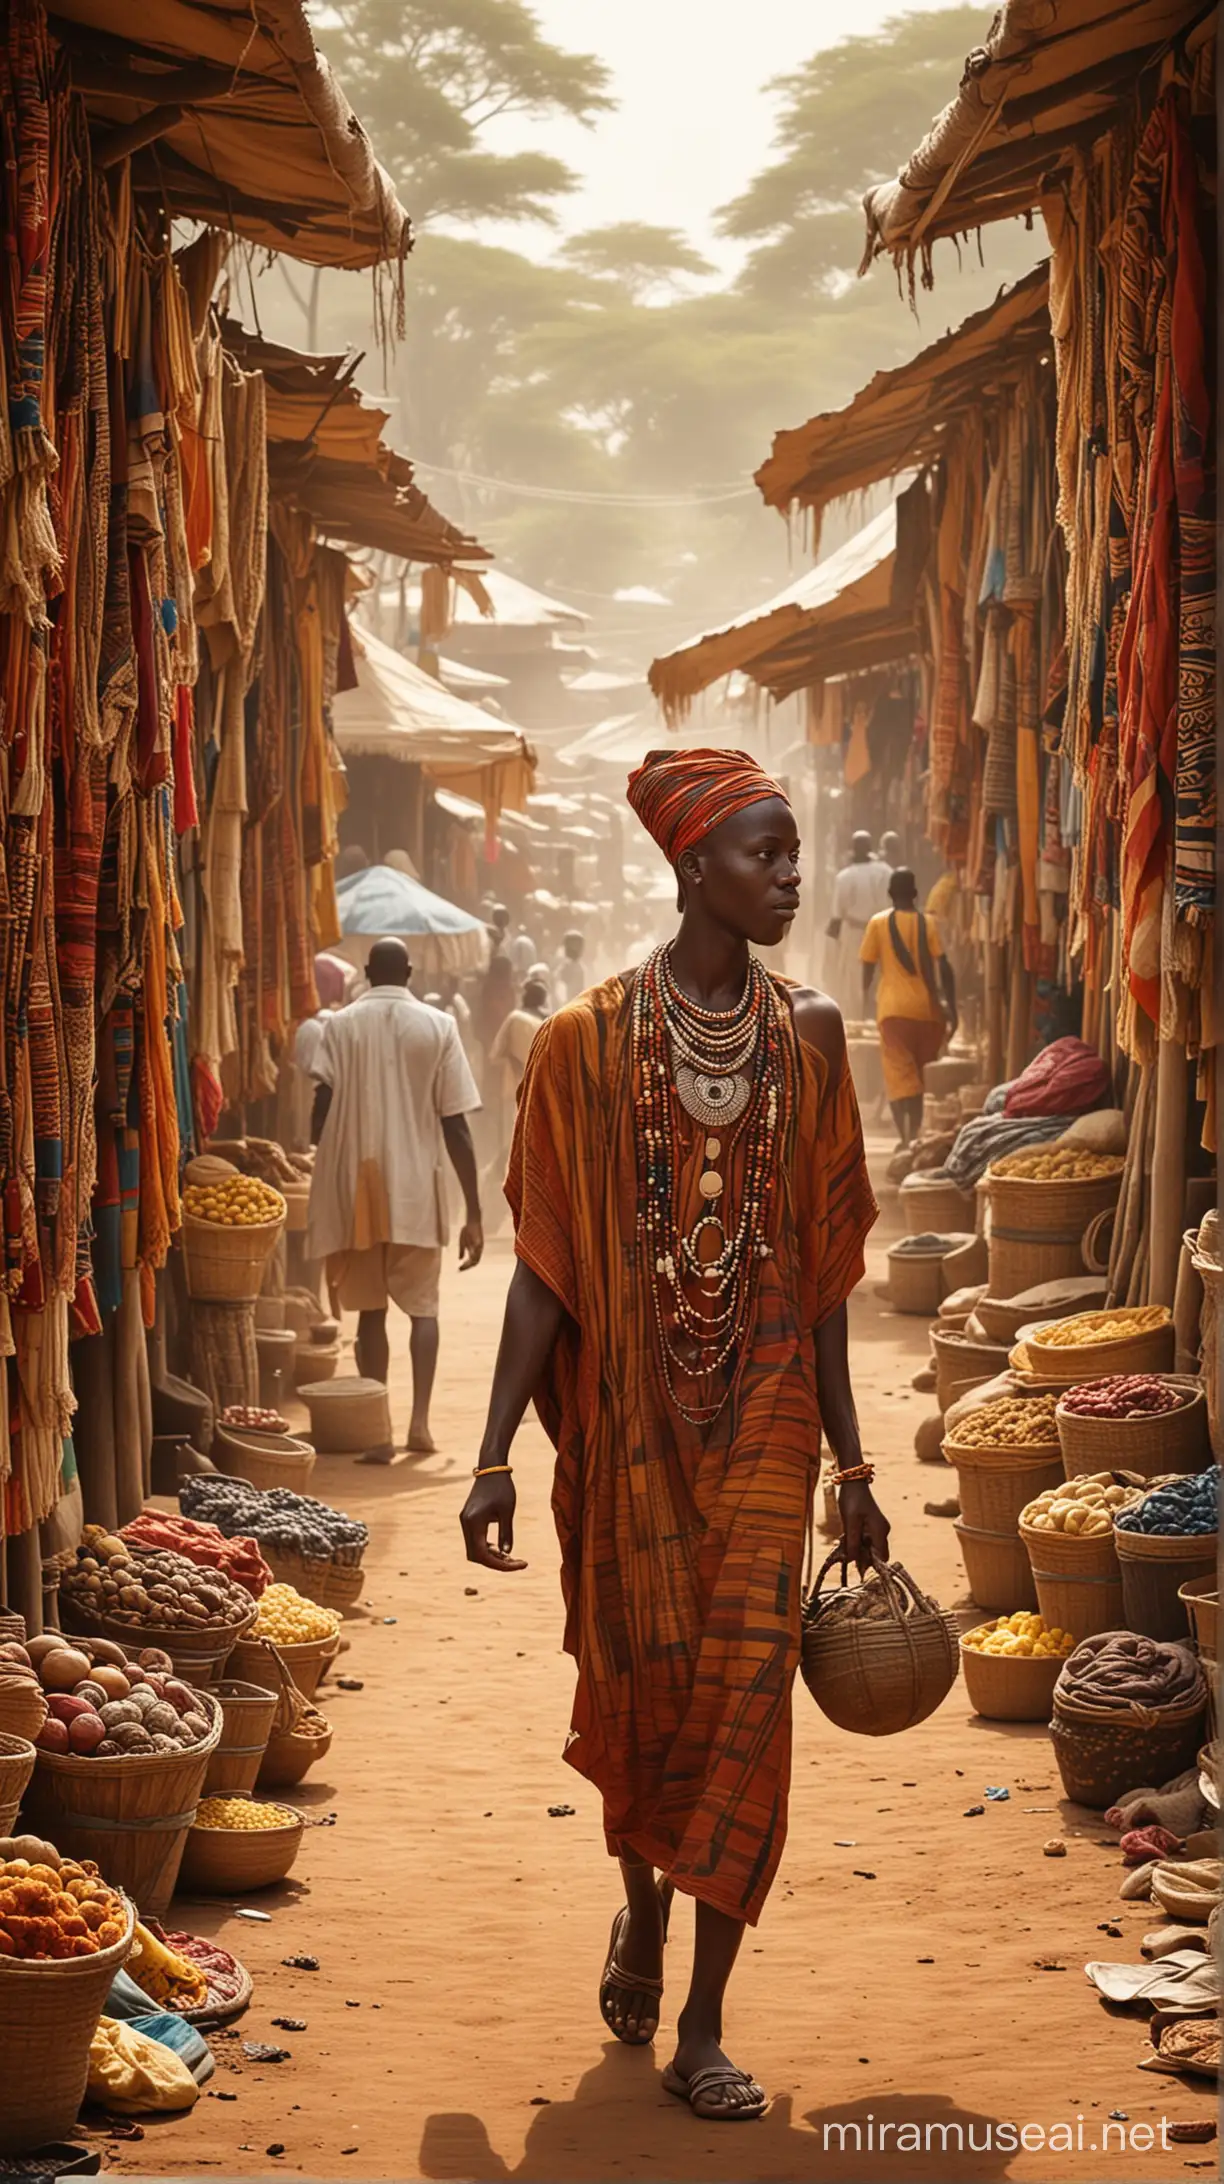 Generate an image capturing the lively atmosphere of an African marketplace, showcasing the rich tapestry of cultures and values in ancient Africa 